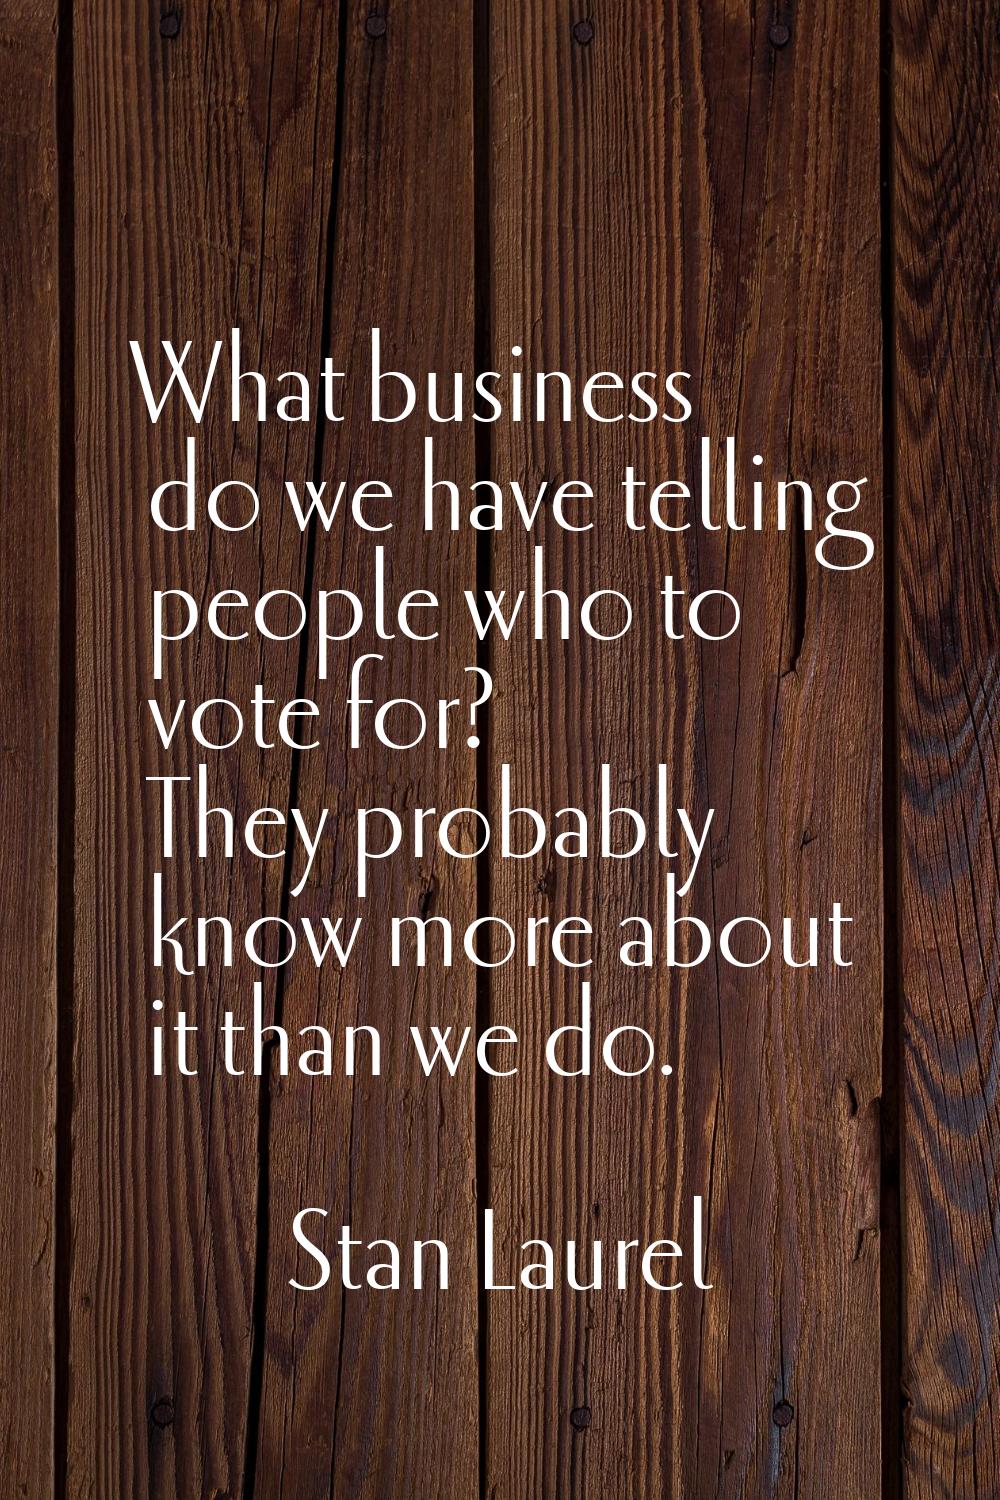 What business do we have telling people who to vote for? They probably know more about it than we d